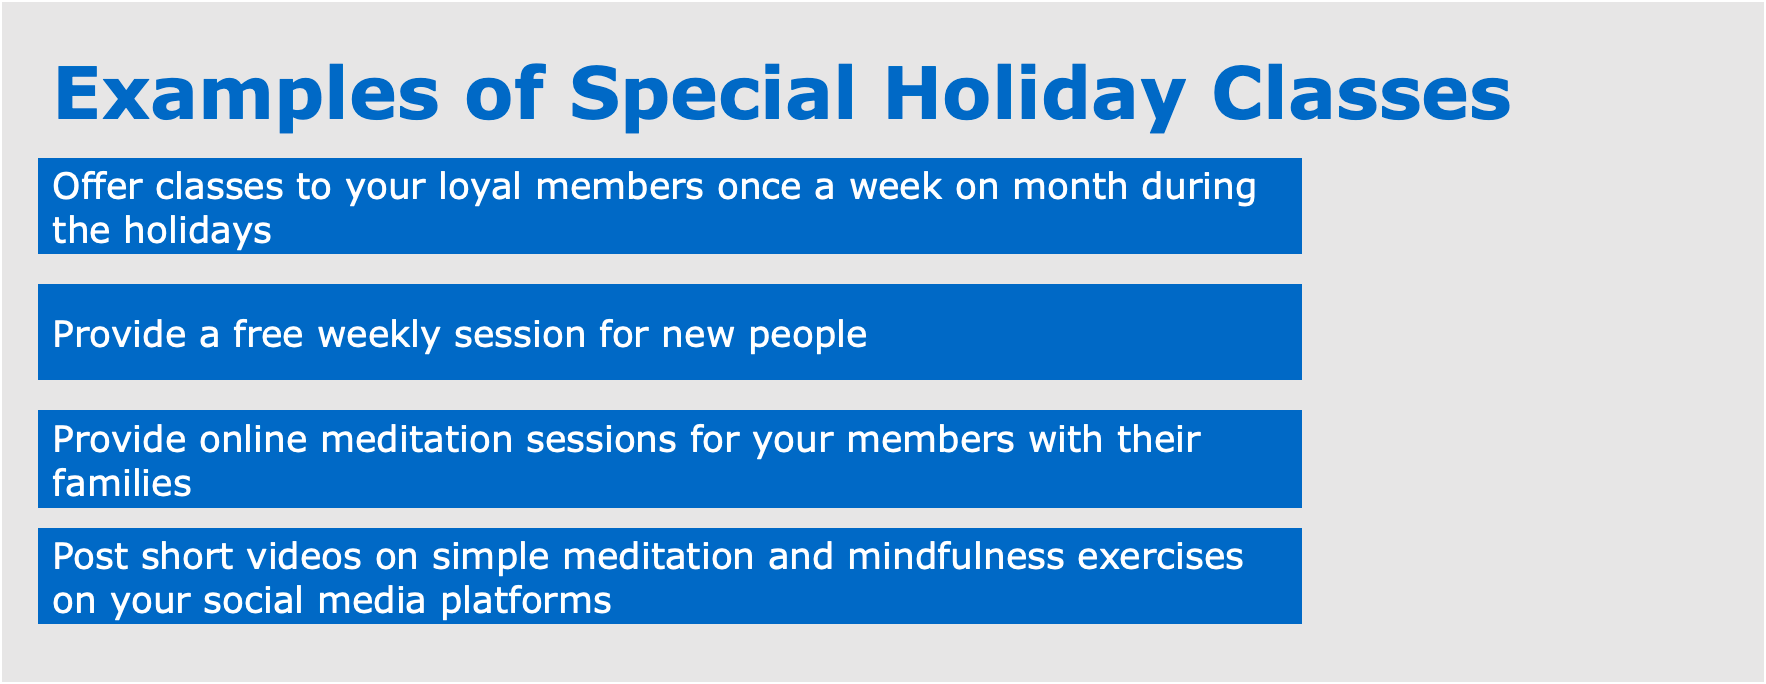 Examples of Special Holiday Classes